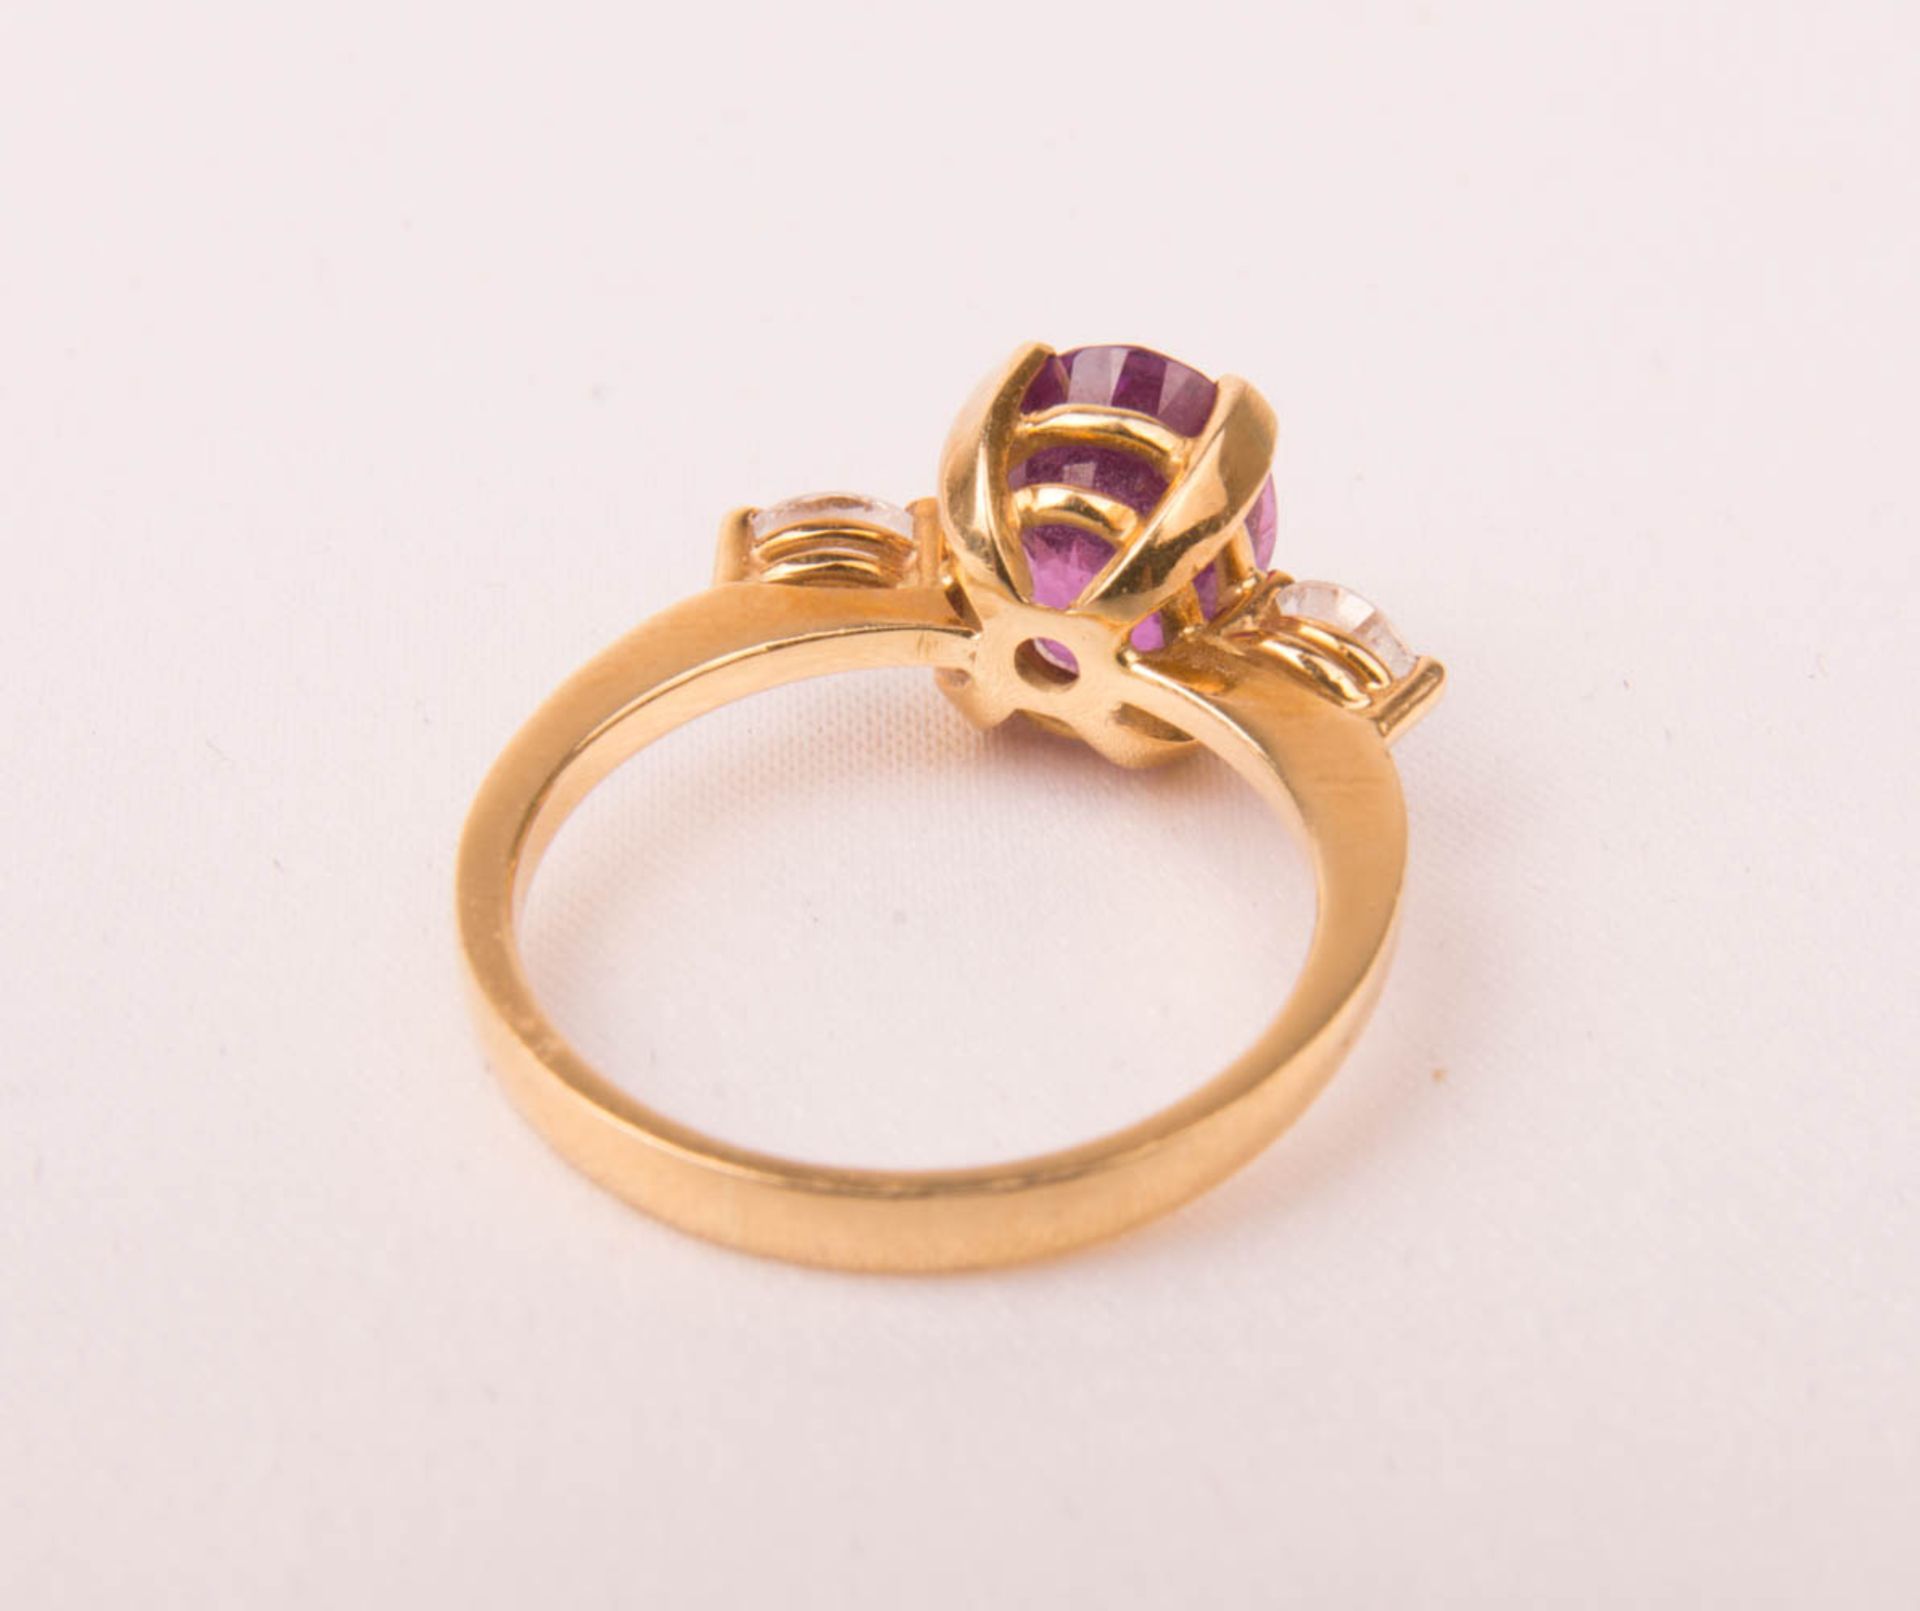 Fine ring with diamonds with large gemstone, 750 yellow gold. - Image 6 of 6